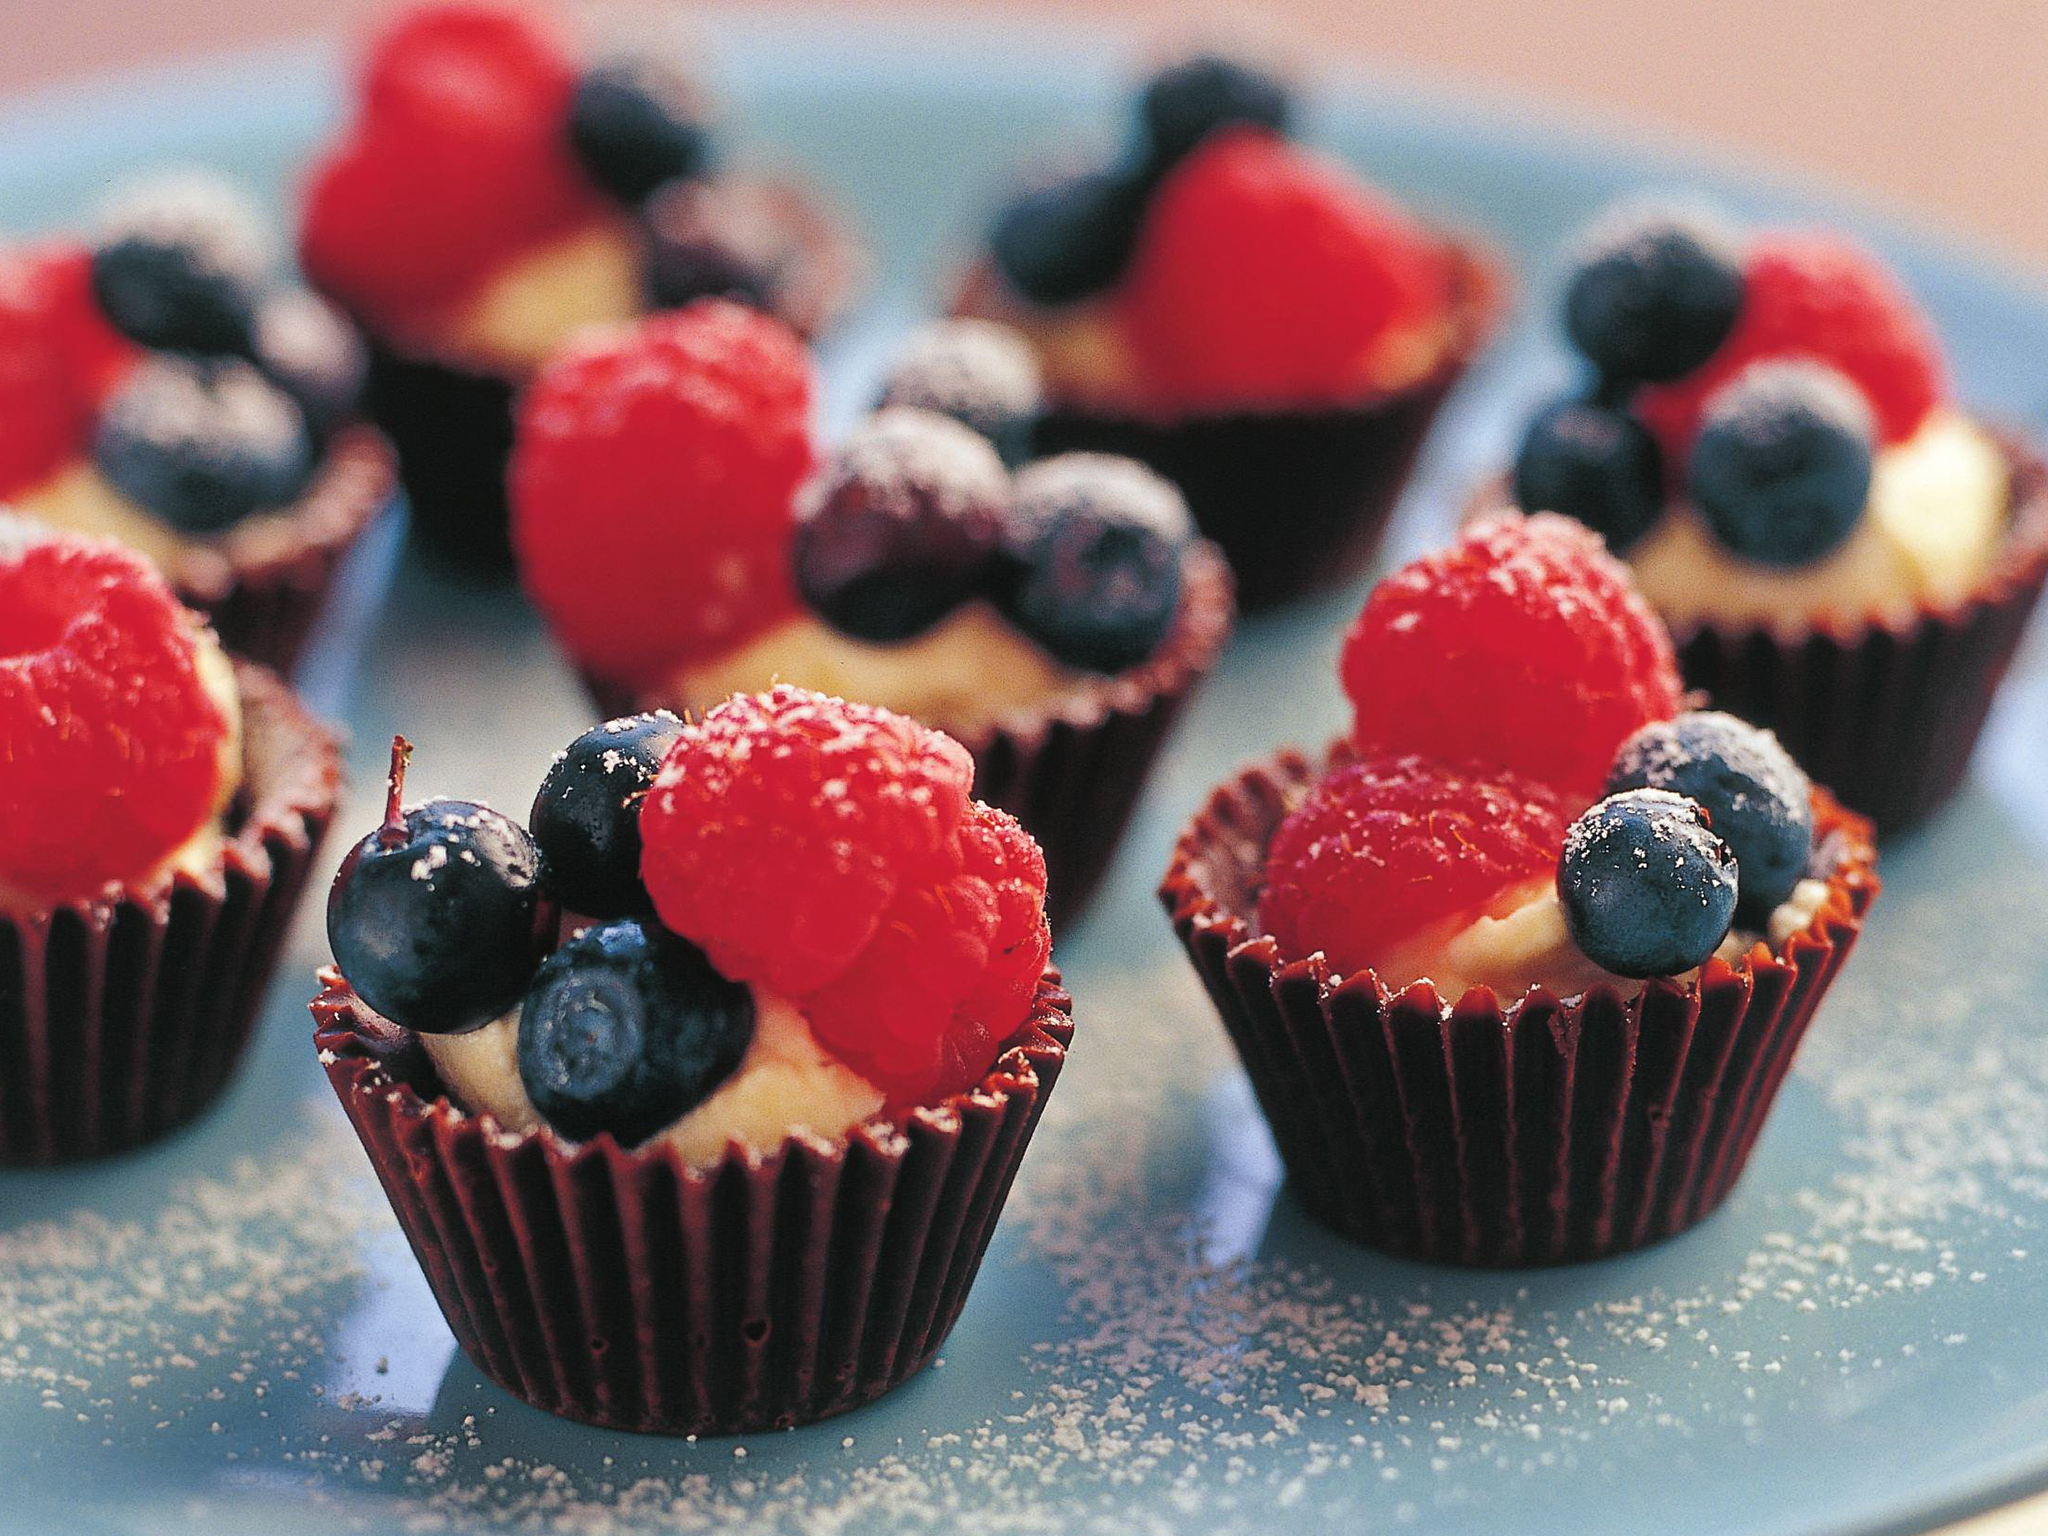 chocolate cases with mascarpone and berries